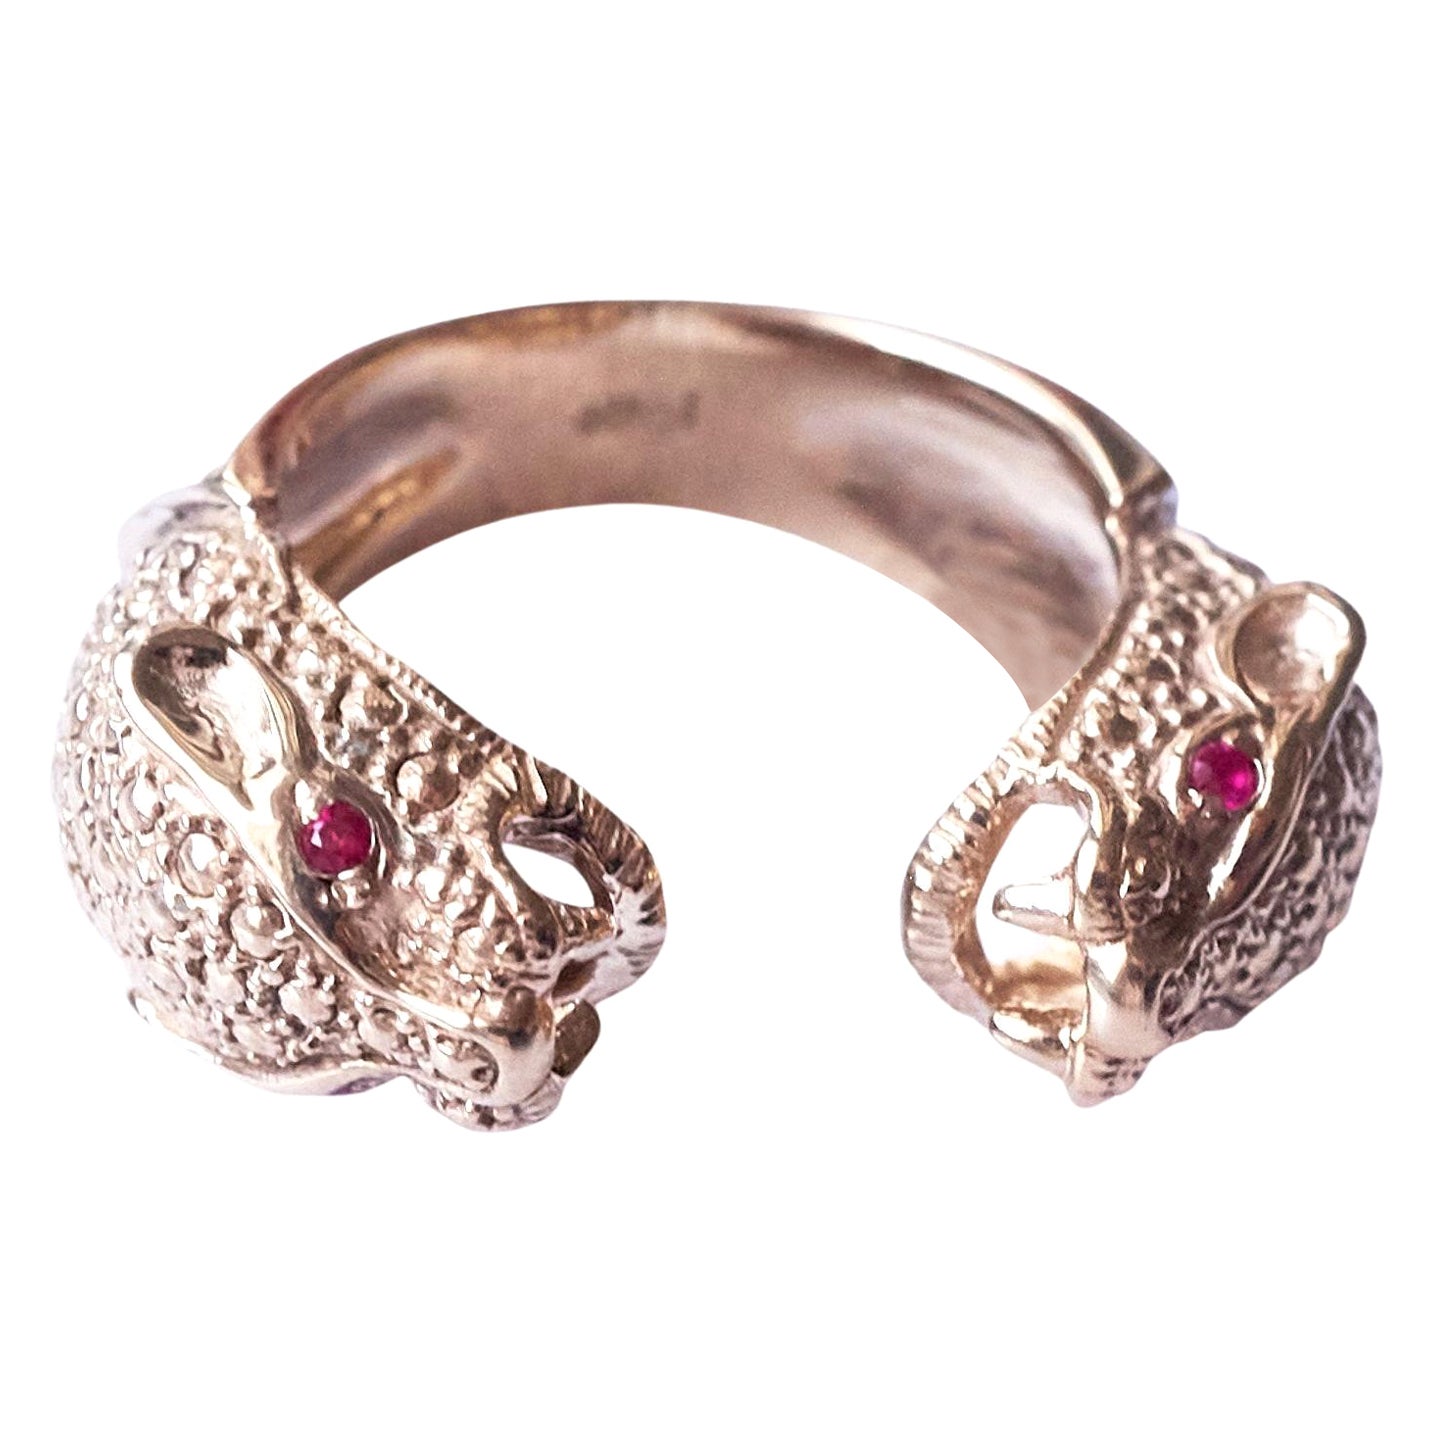 Ruby Jaguar Ring 18 Carat Gold Animal Jewelry Cocktail Ring J Dauphin For Sale